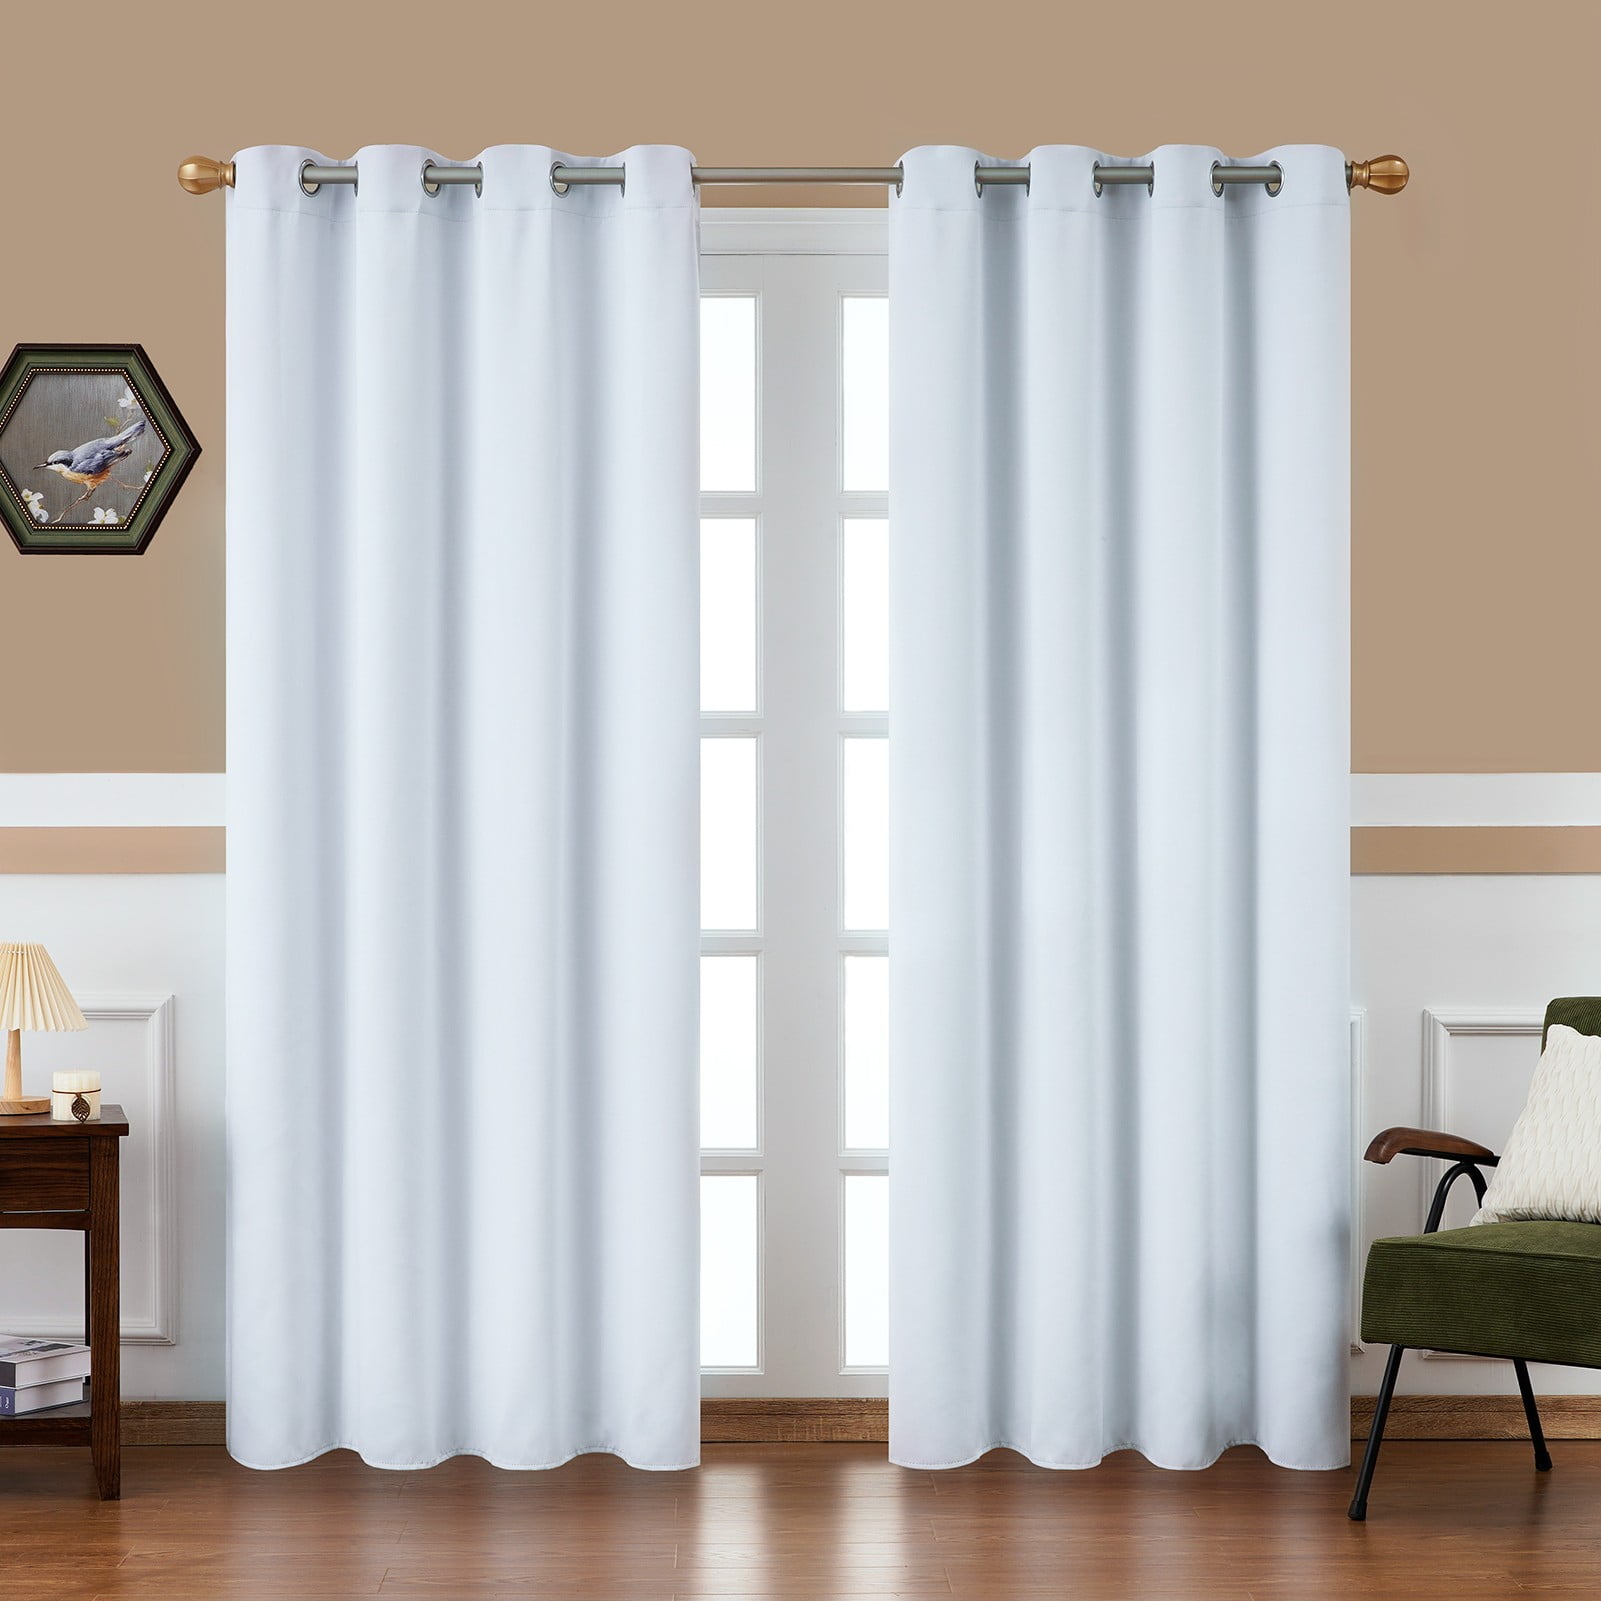 2 Panel Demon Slayer Solid Lined Thermal Insulated Grommet Window Curtain Drapes 